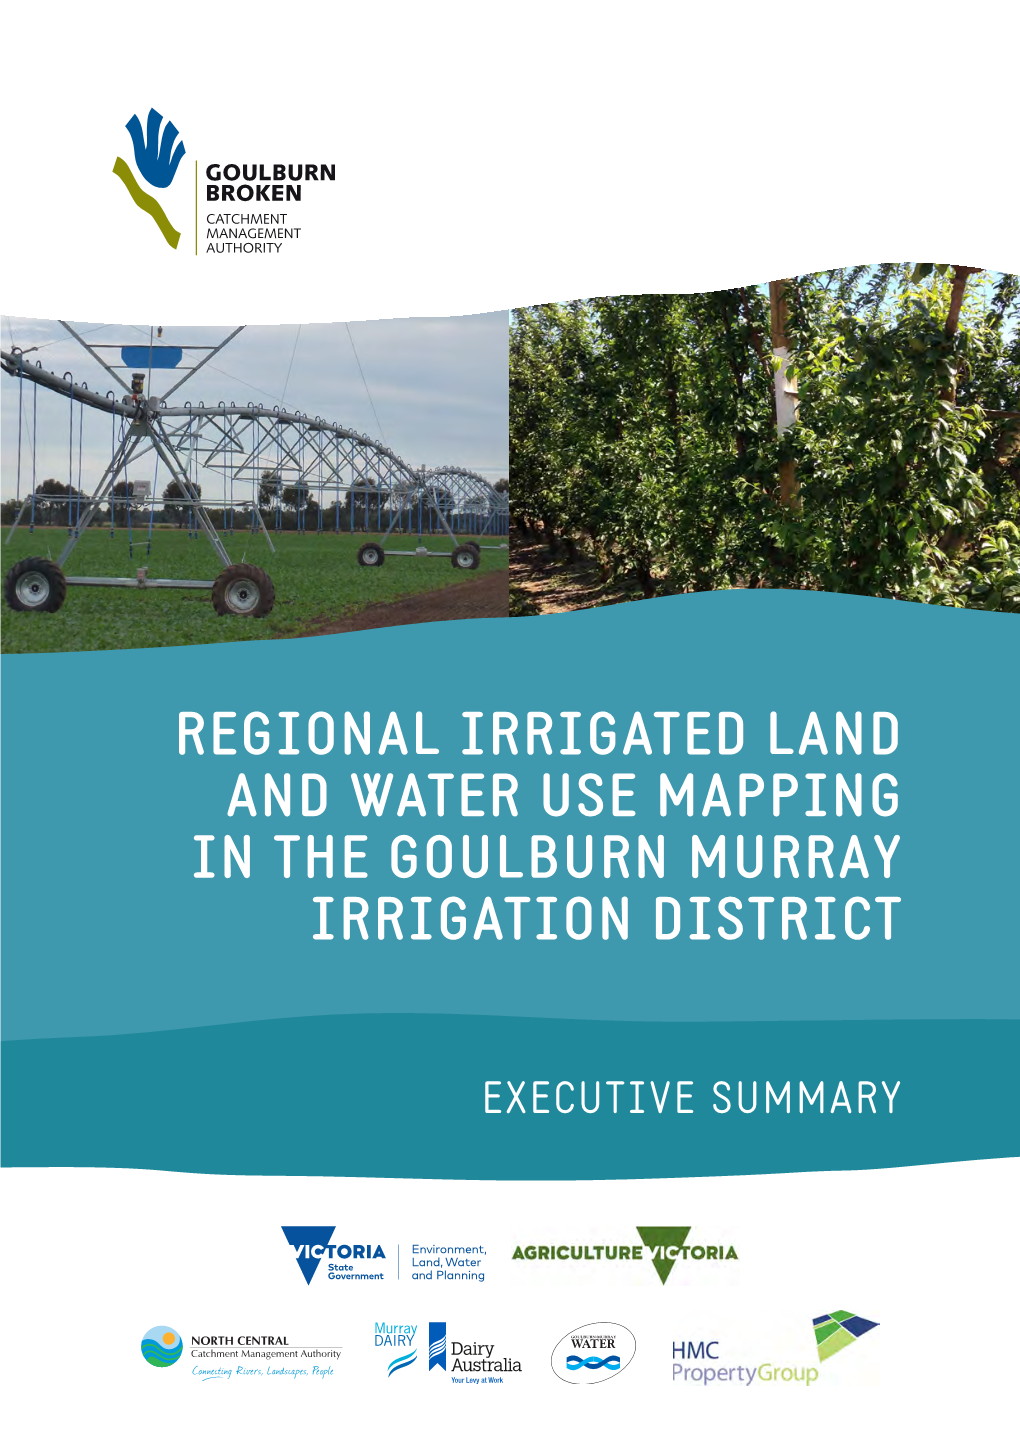 Regional Irrigated Land and Water Use Mapping in the GMID